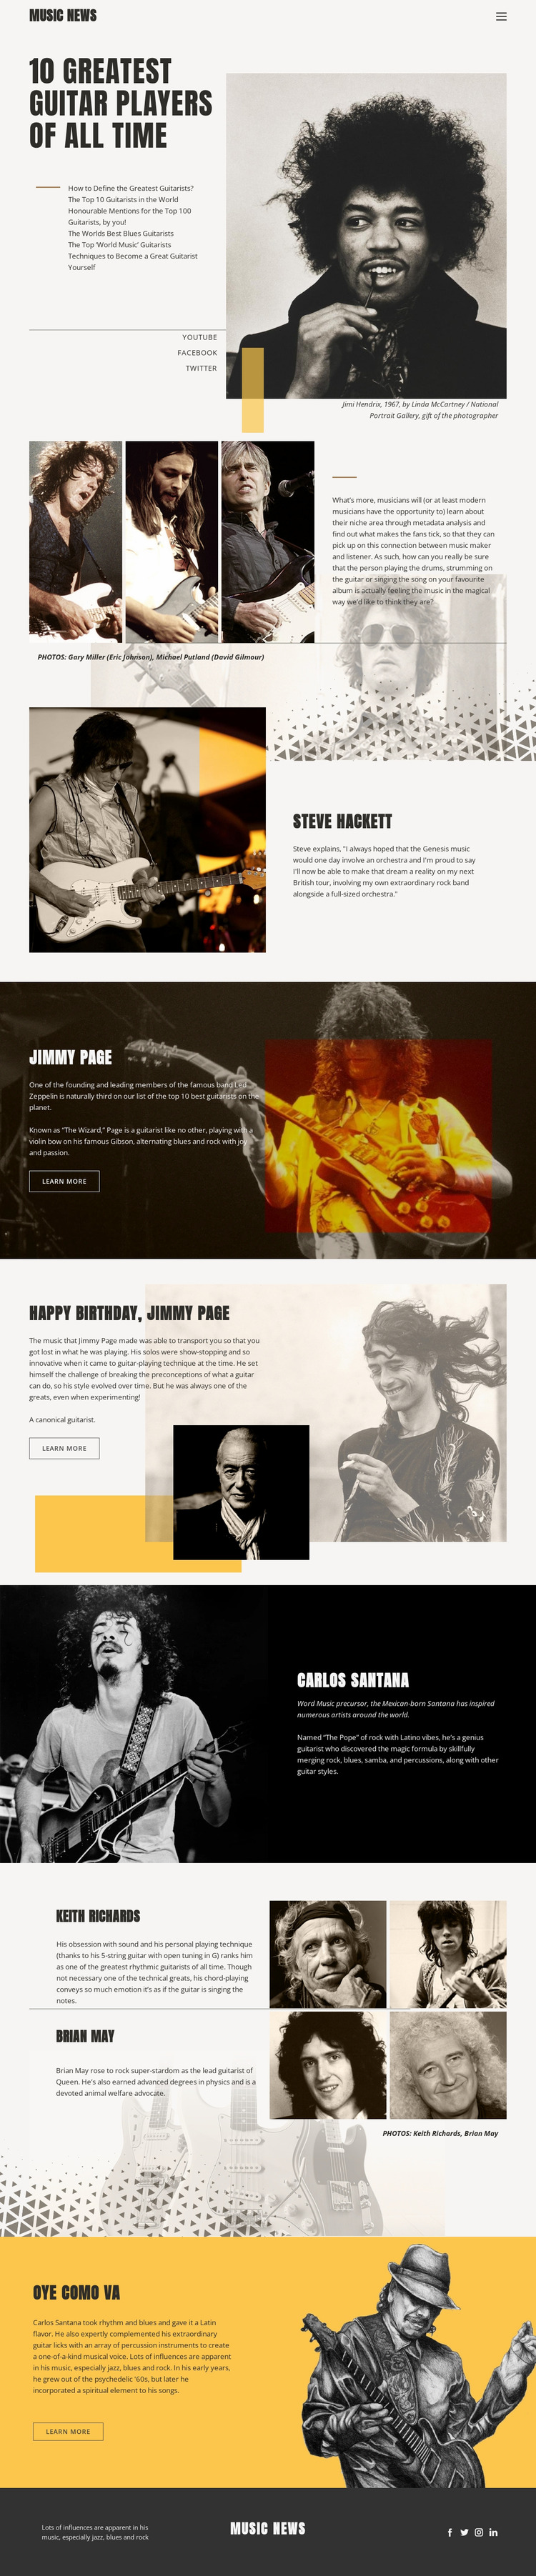 The Top Guitar Players Website Mockup